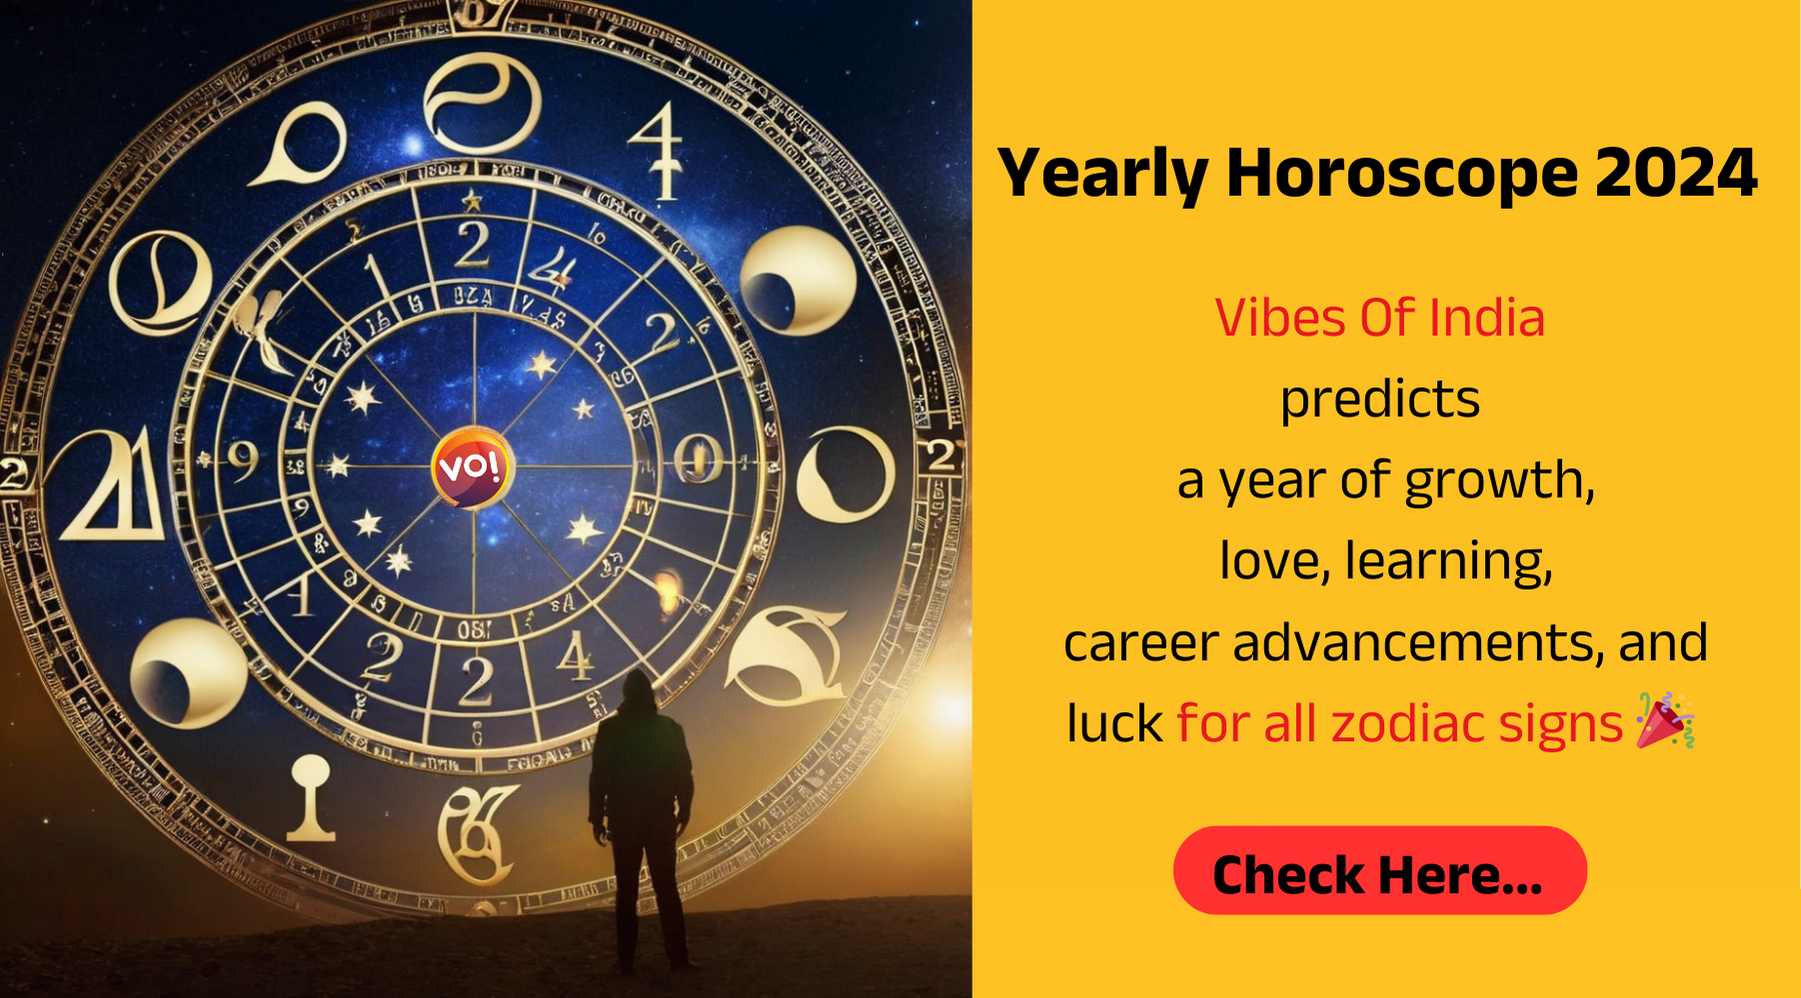 Yearly Horoscope 2024 - Know How Your 2024 Year Will Be